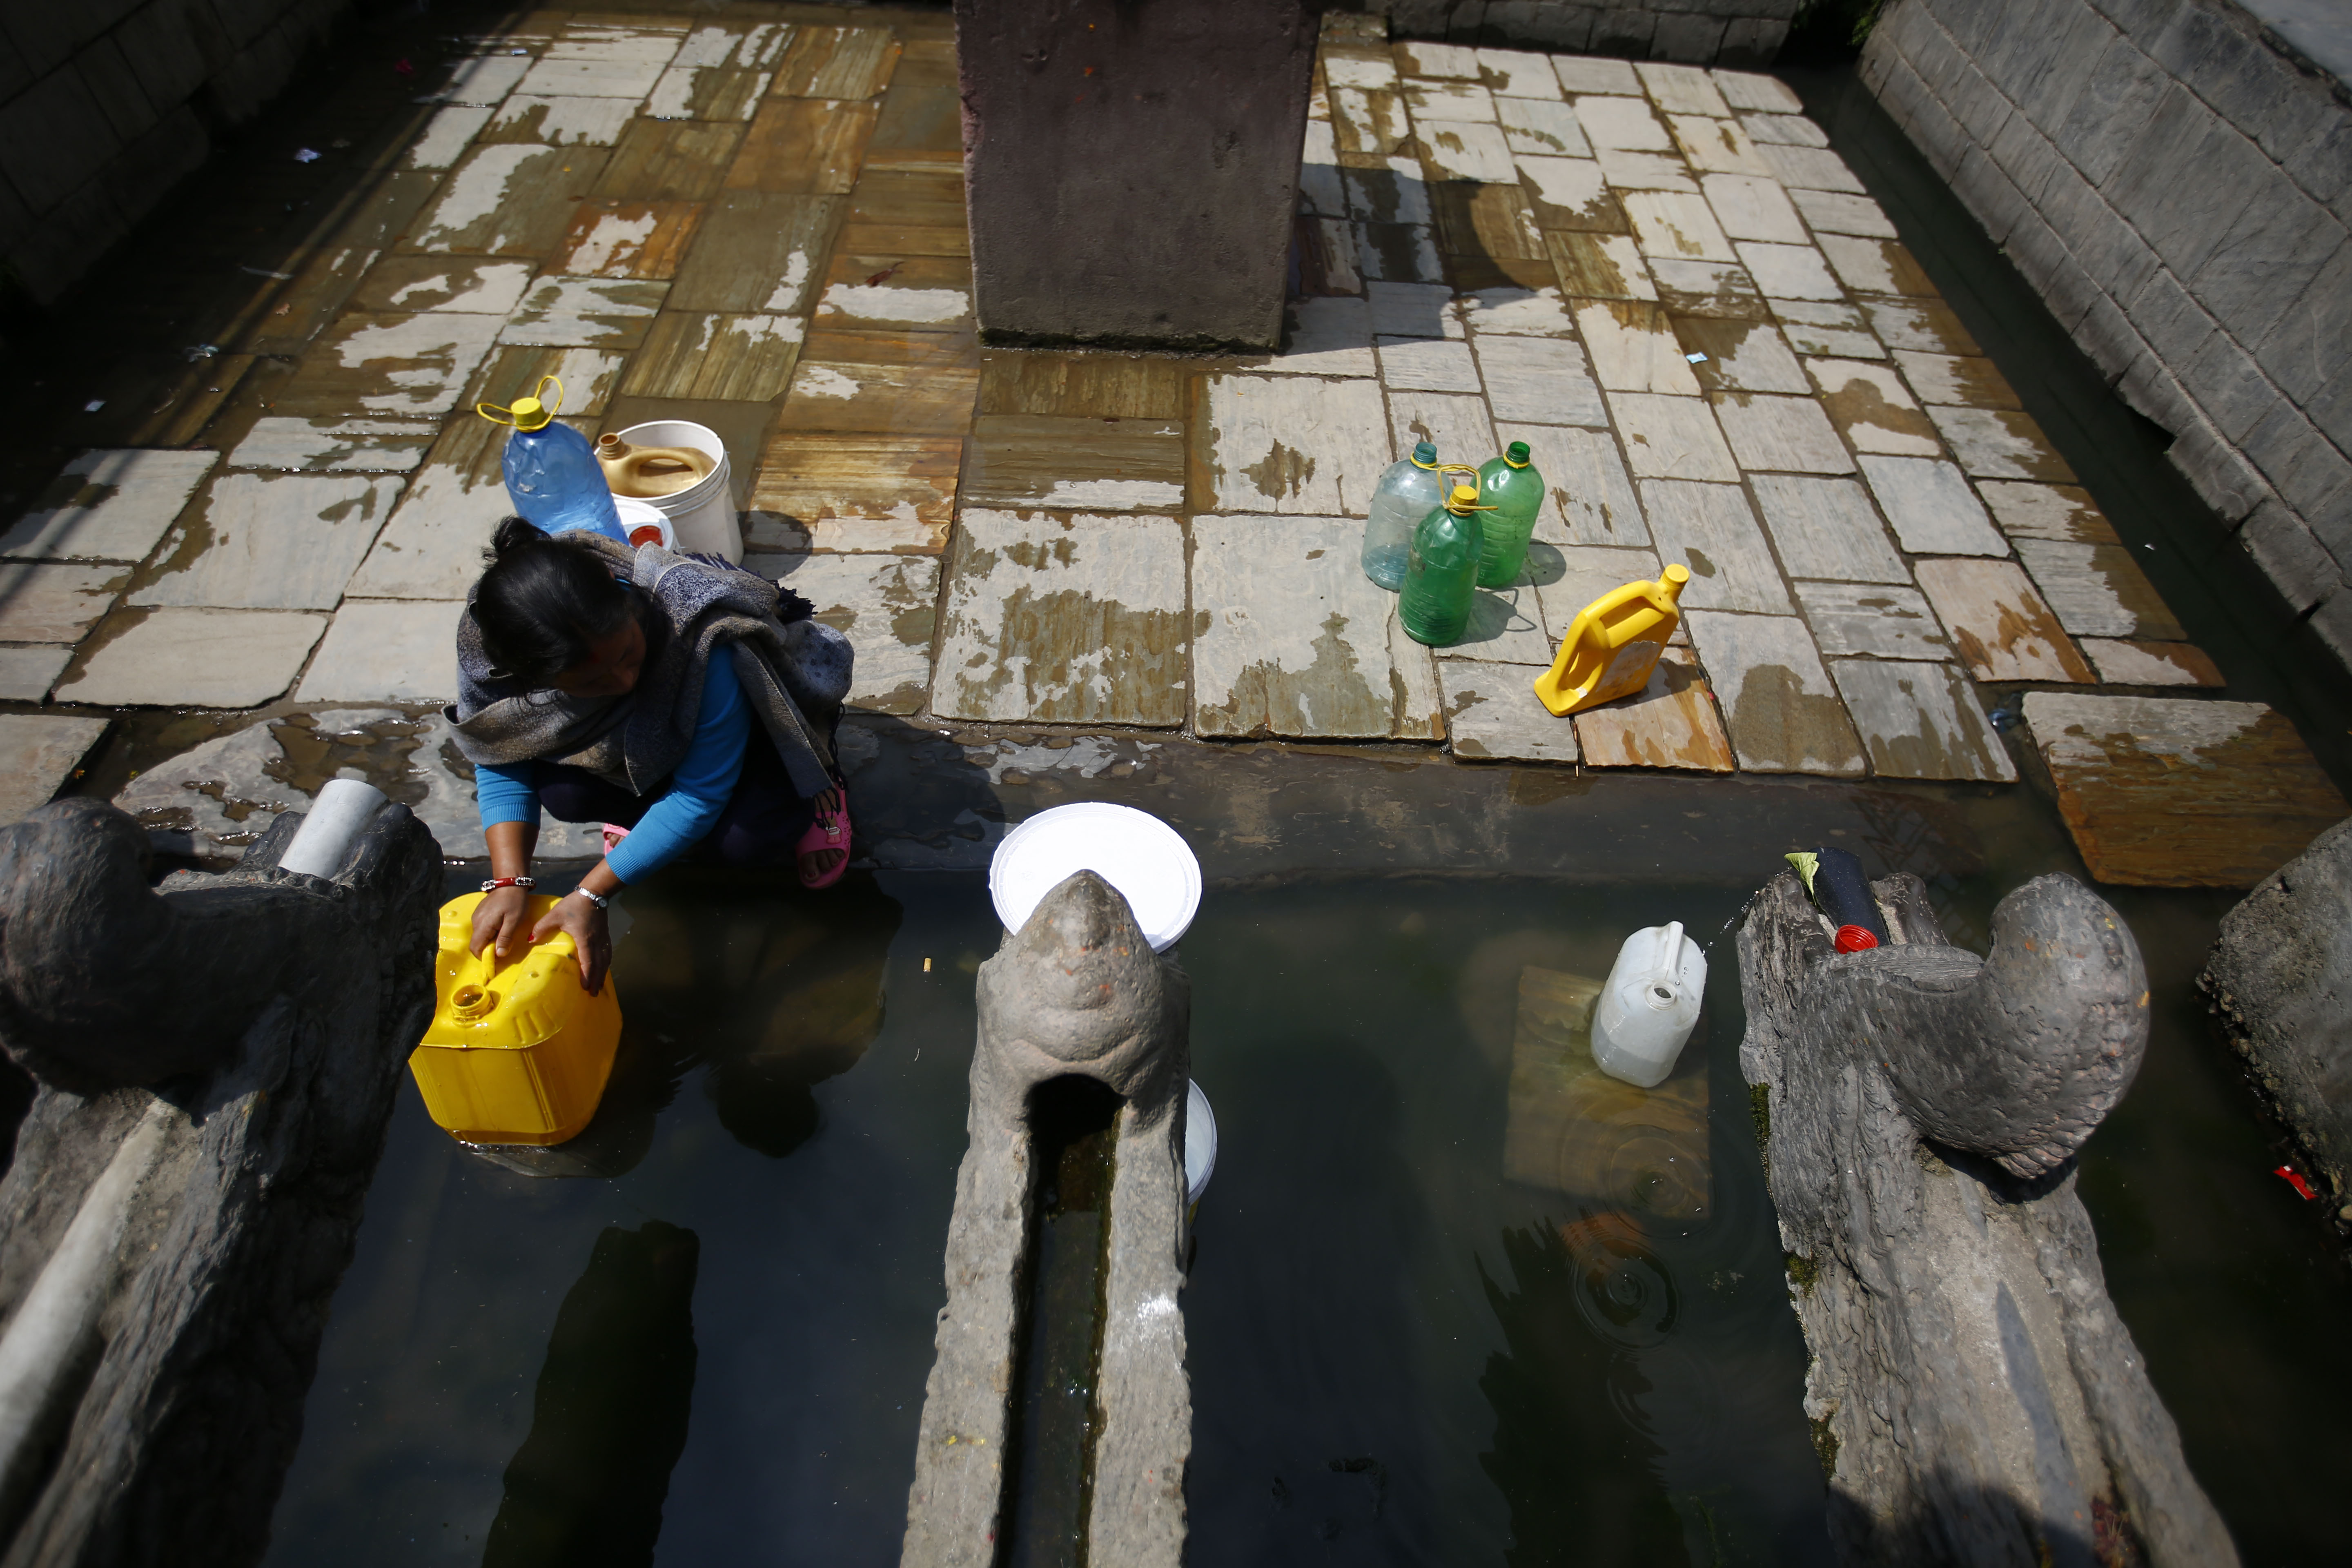 A woman collects drinking water from a traditional water spout on World Day for Water in Lalitpur, on Thursday, March 22, 2018. Photo: Skanda Gautam